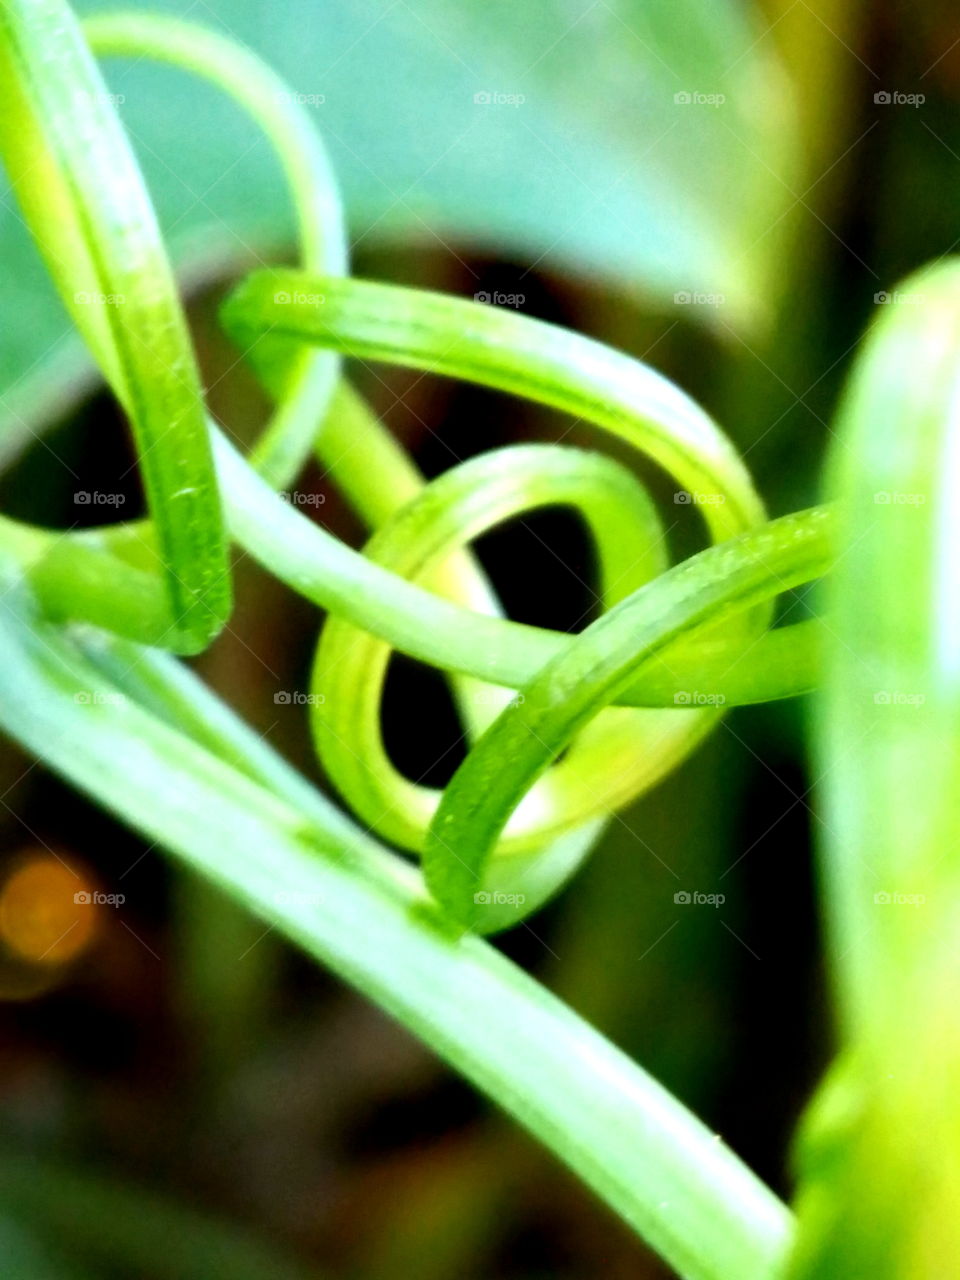 Extreme close-up of creeper plant